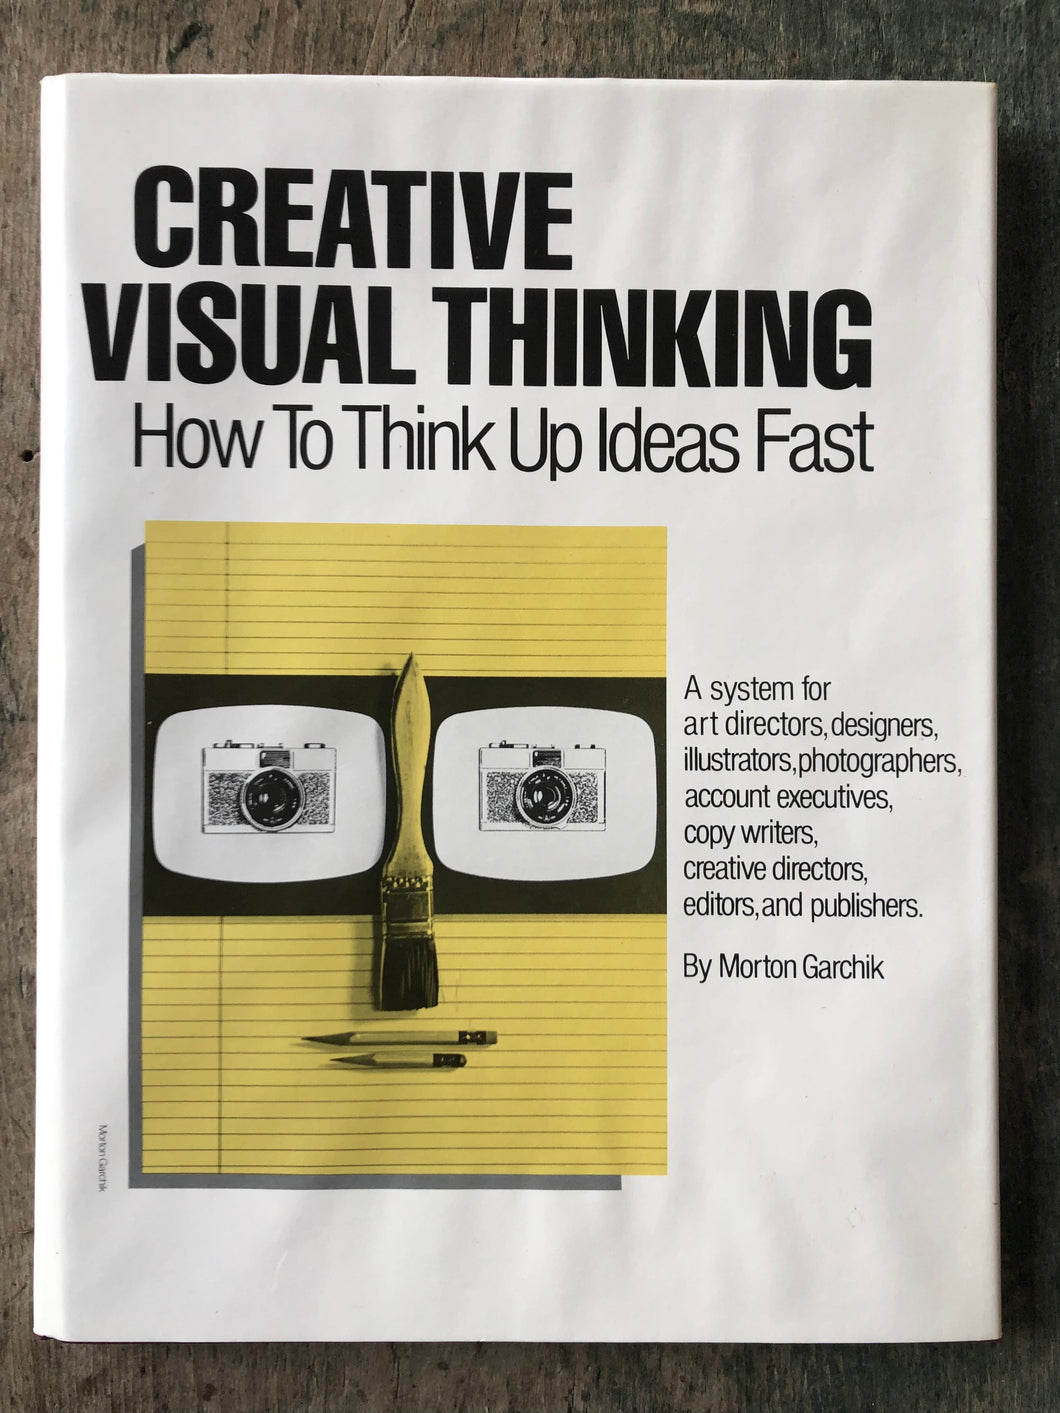 Creative Visual Thinking: How to Think Up Ideas Fast. by Morton Garchik